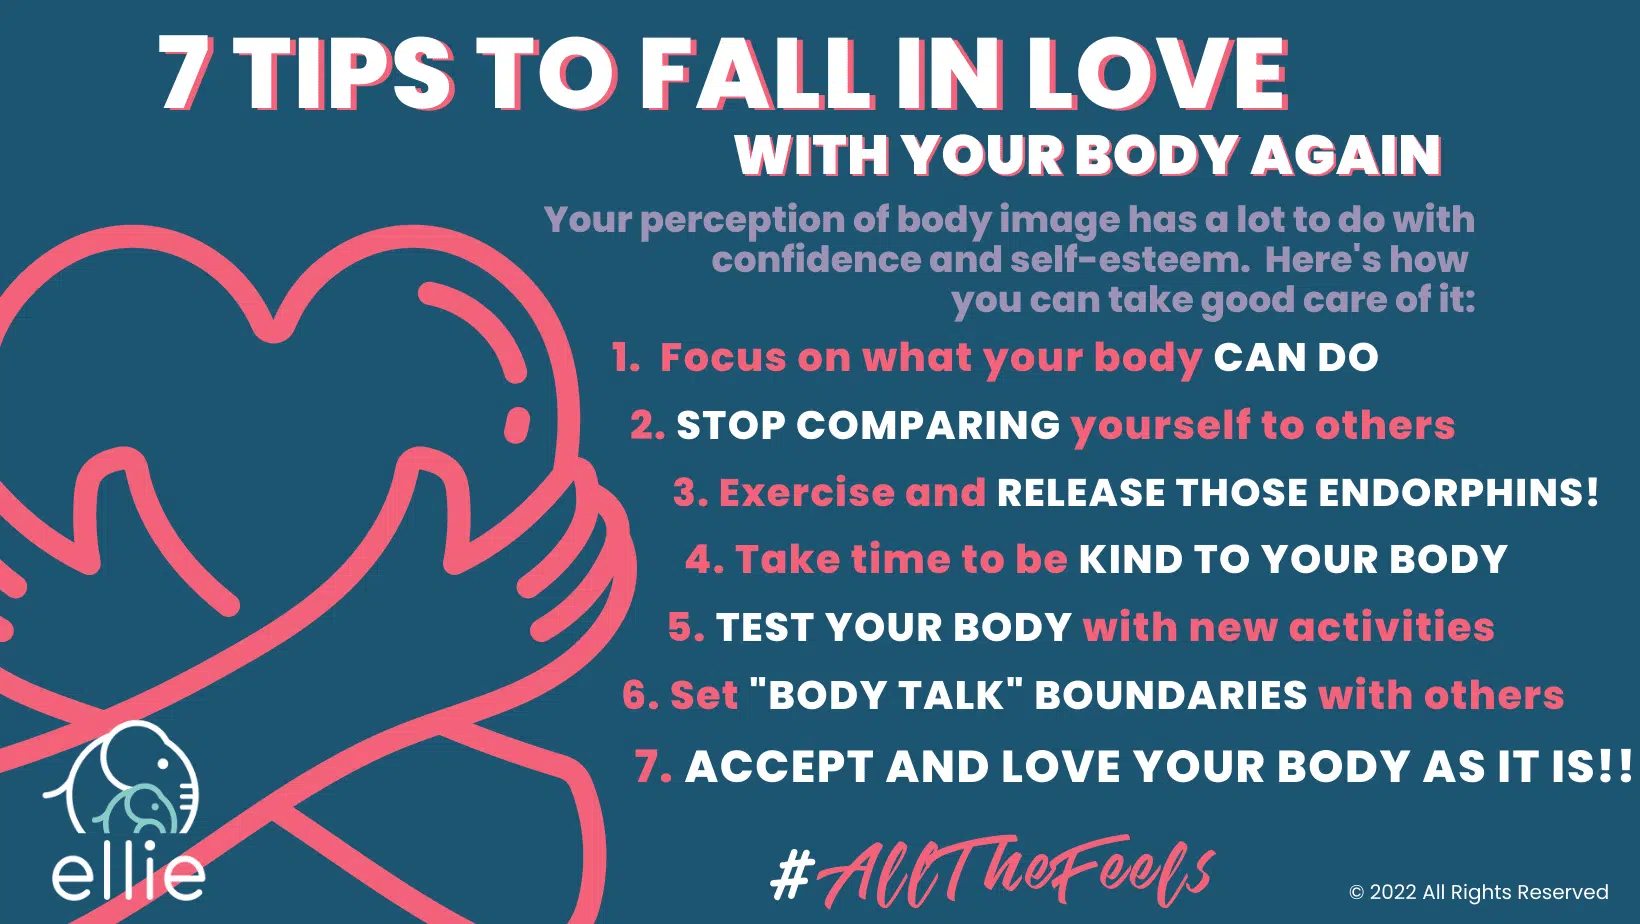 7 Tips to Fall in Love With Your Body Again Infographic